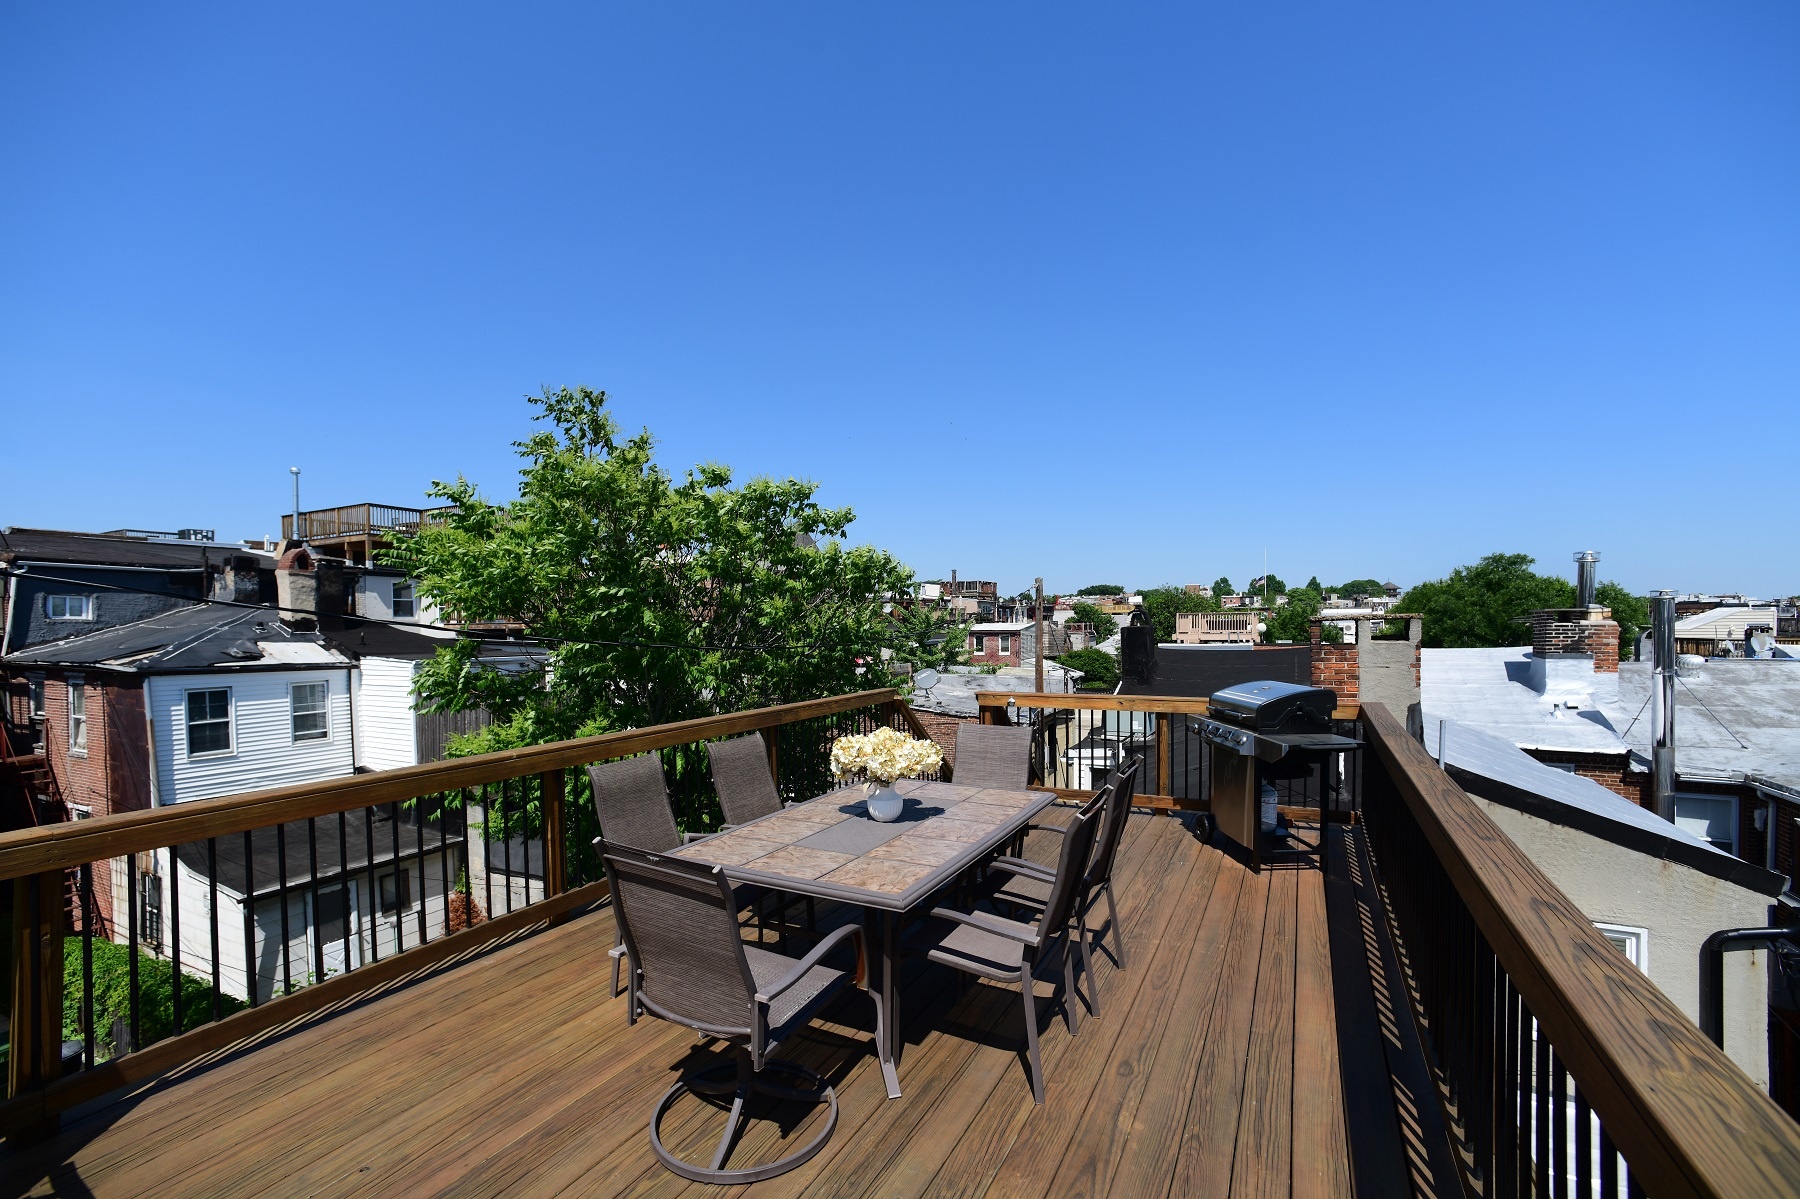 Sky-High Serenity: Rooftop Deck Escapes